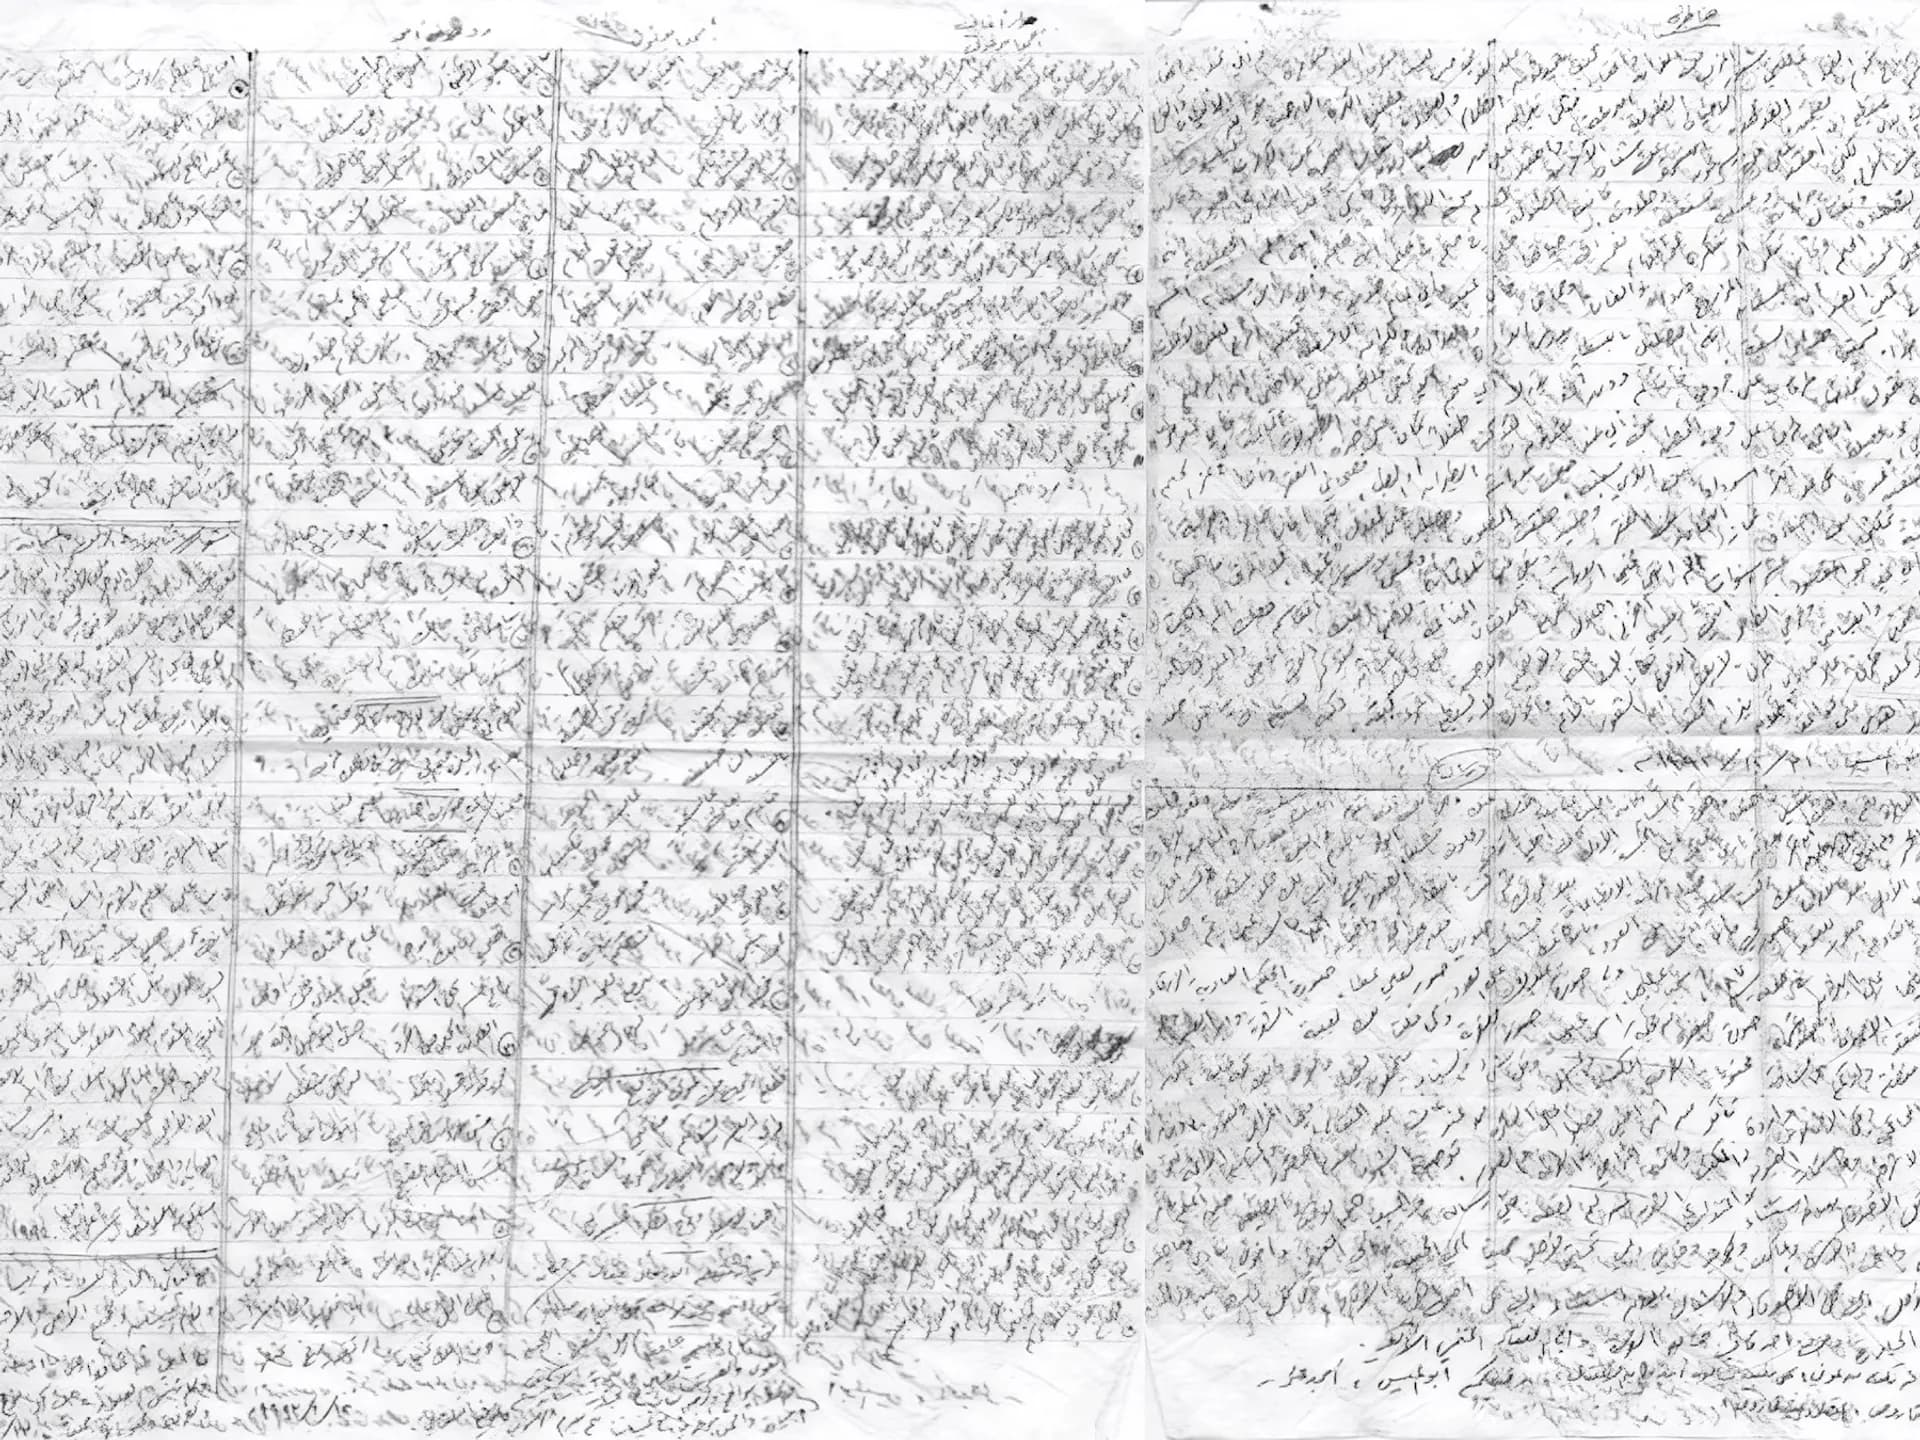 An example of msamsam handwriting on an unfolded sheet of paper, previously inside a cabsulih. From Esmail Nashif, “Building the Community: The Body, the Material Conditions, and the Communication Networks,” in Palestinian Political Prisoners: Identity and Community (London: Routledge, 2010).